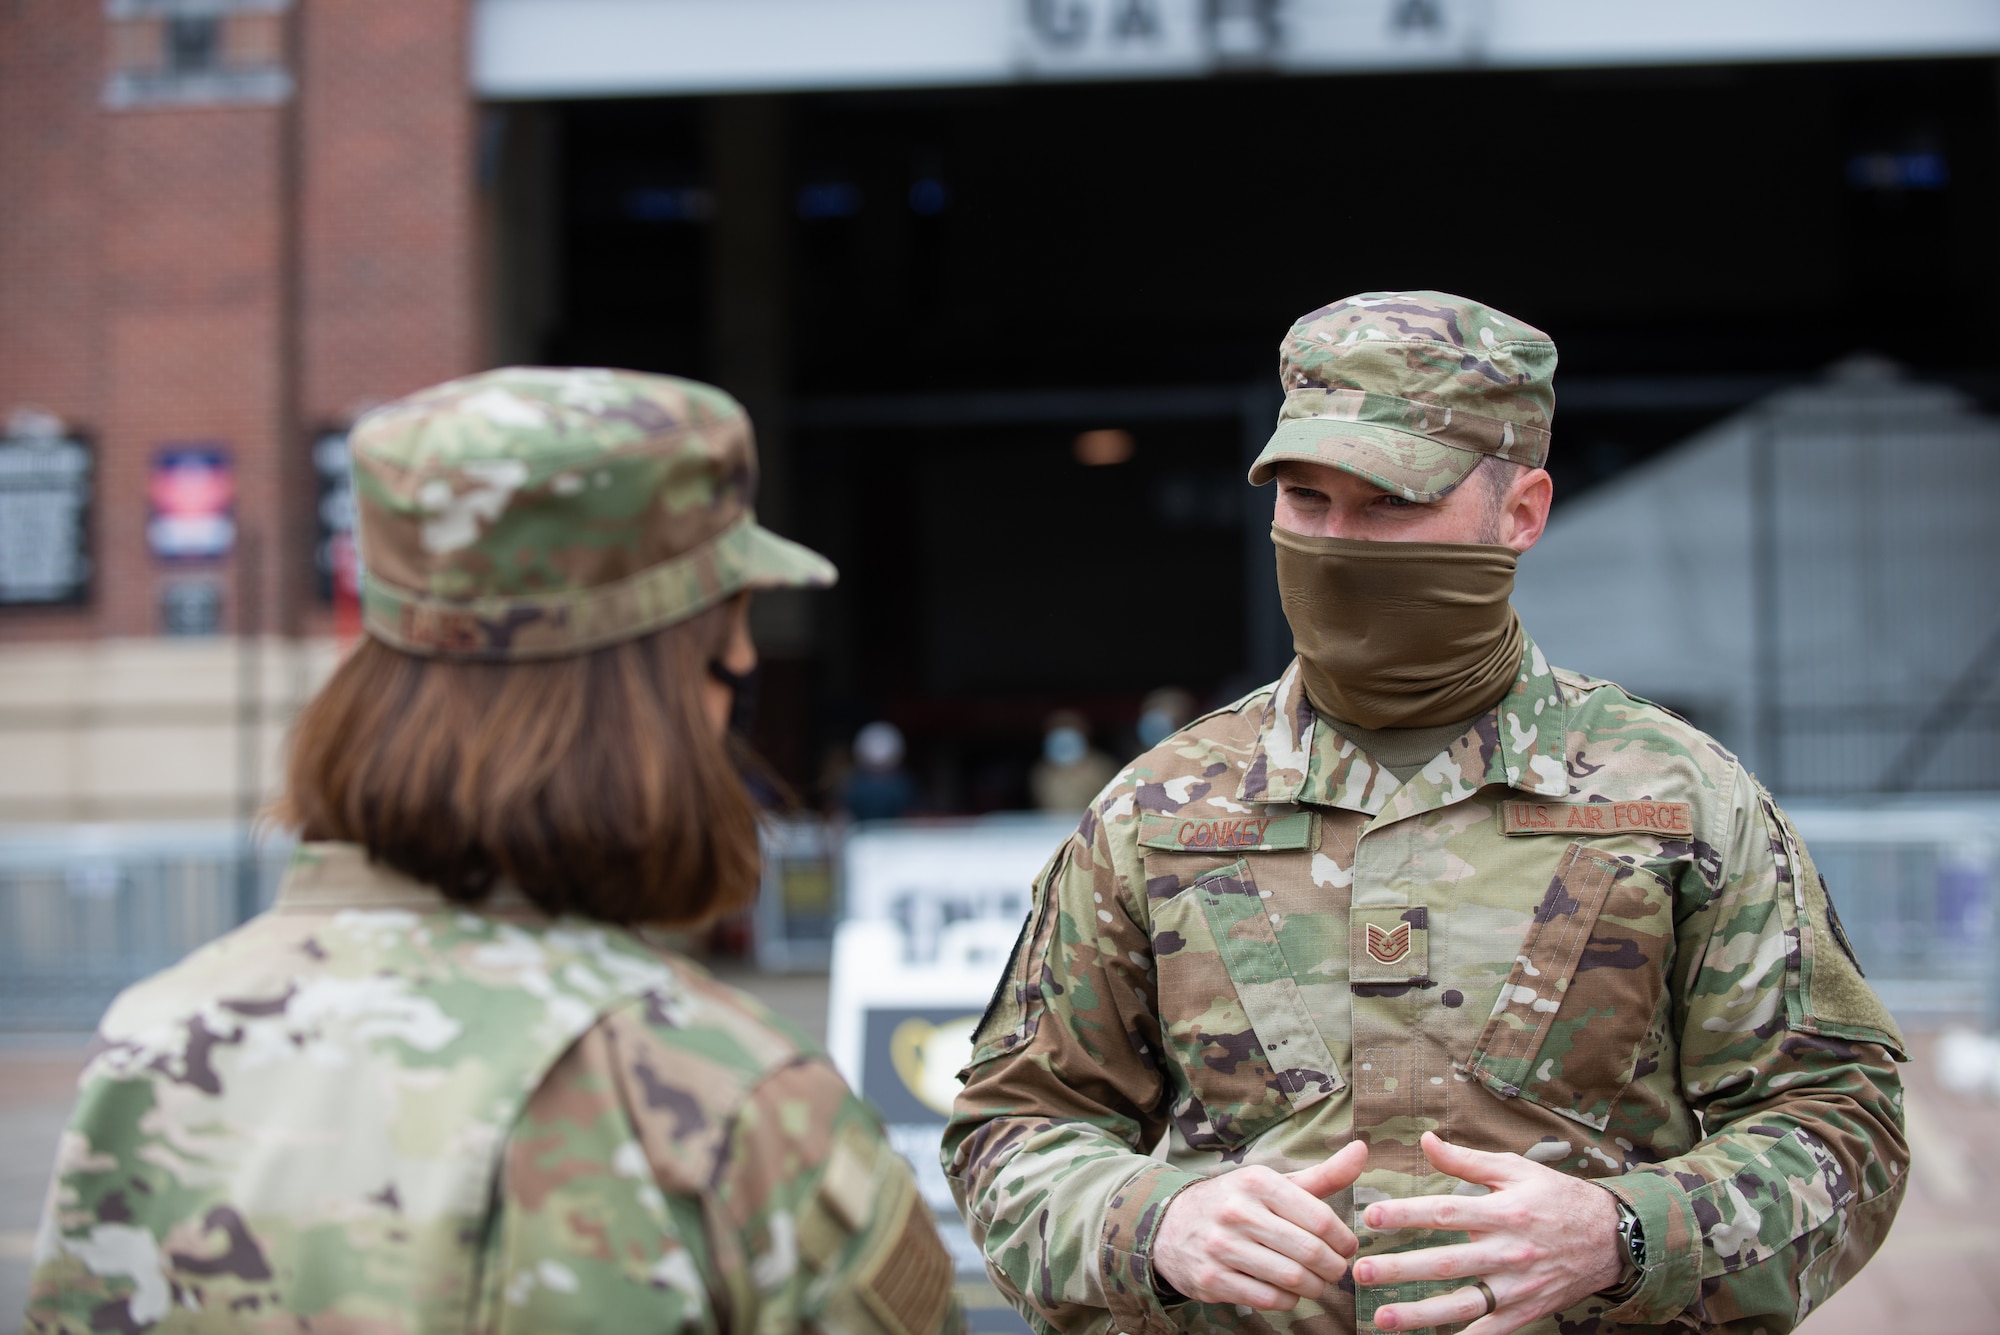 Chief Master Sgt. of the Air Force JoAnne S. Bass speaks to Tech. Sgt. Stephen Conkey, an aircrew flight equipment technician assigned to the 175th Operations Support Squadron, while visiting the mass vaccination site at M&T Bank Stadium, Baltimore, on May 3, 2021.